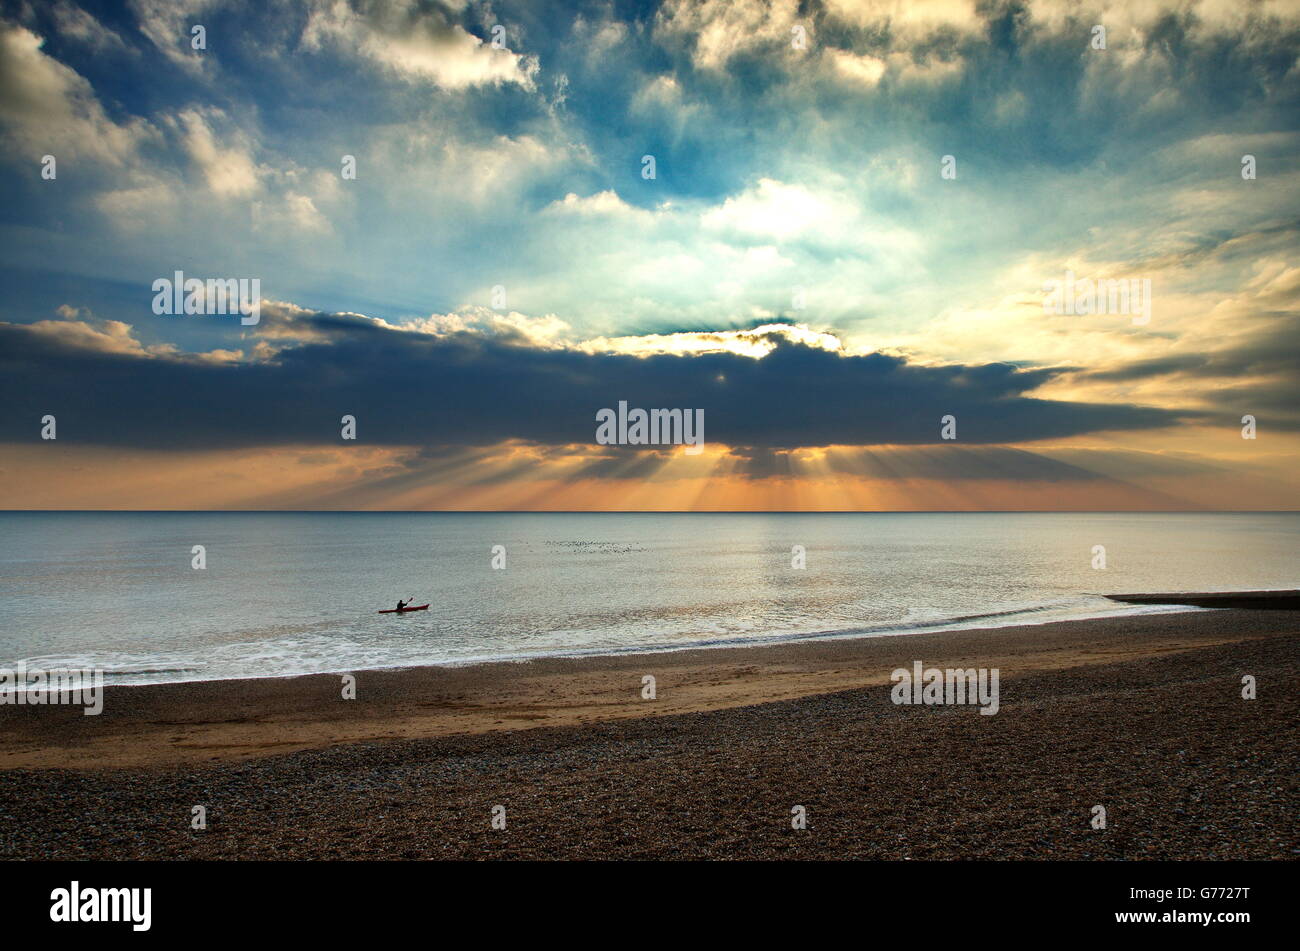 a lone Kayaker jn a seascape of Crepuscular rays breaking through some storm clouds Stock Photo